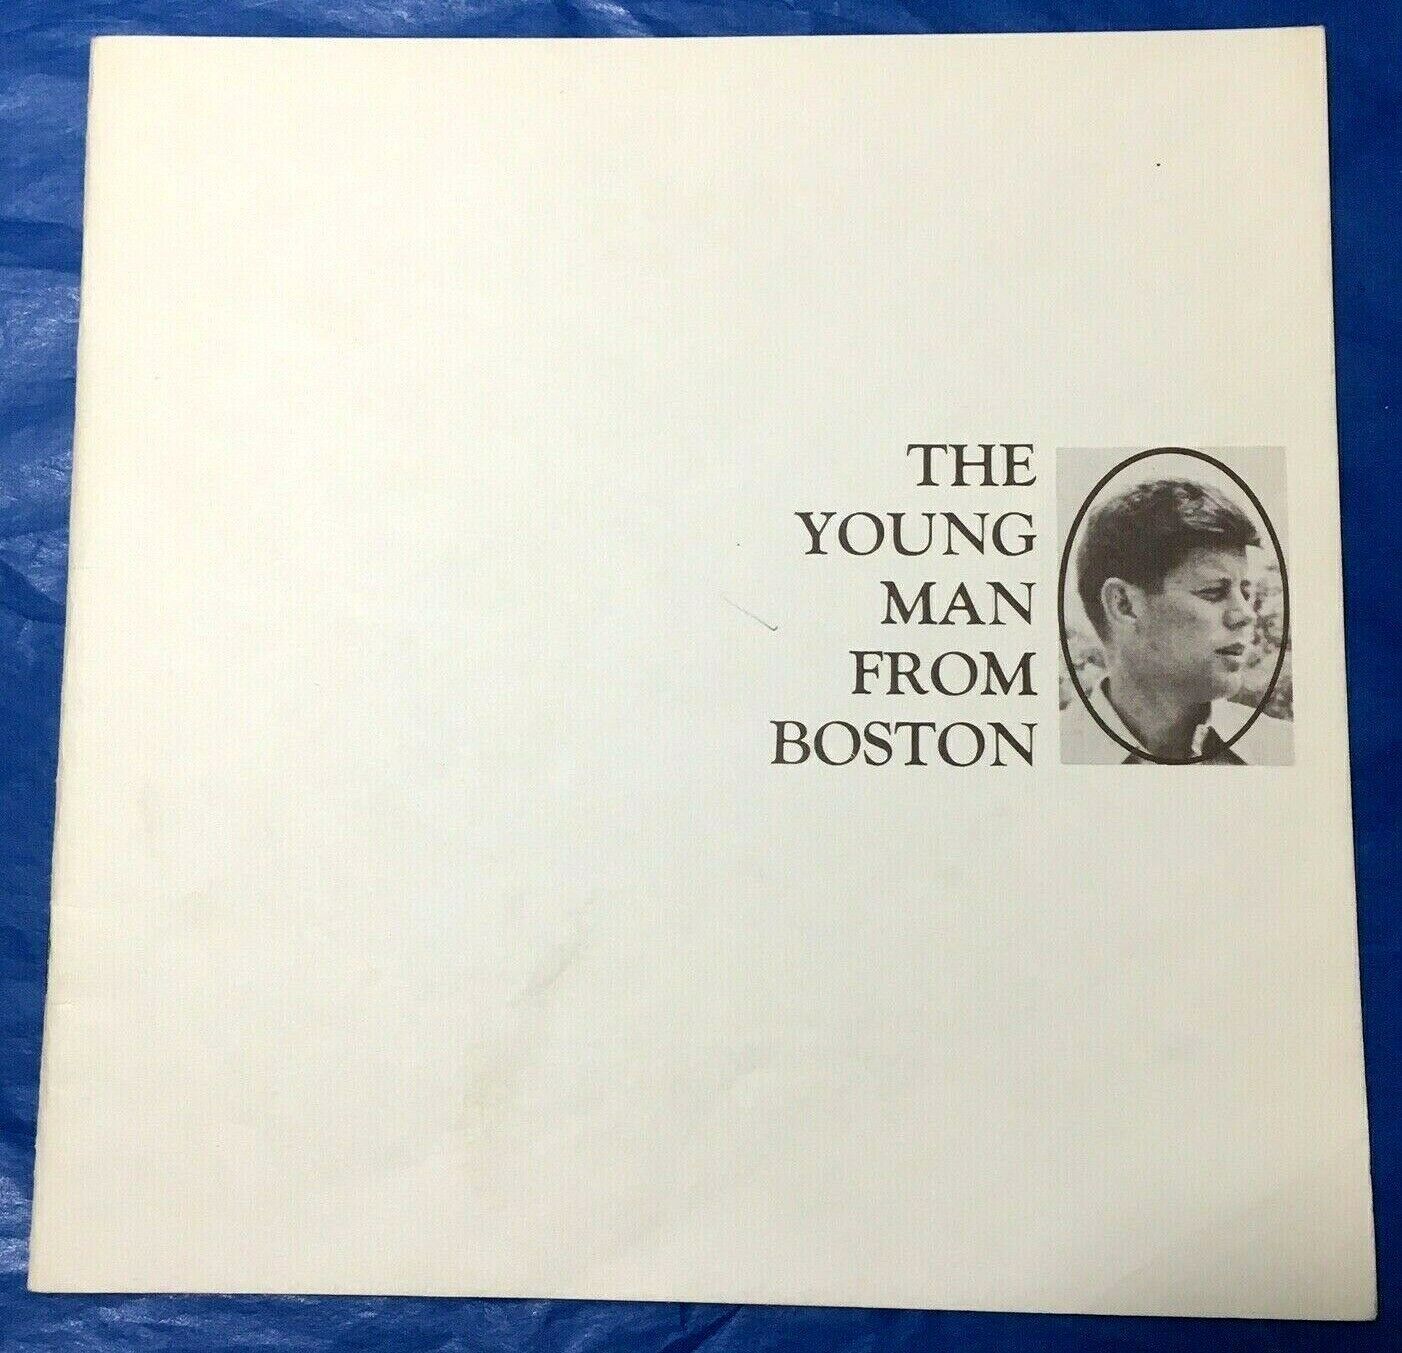 John F Kennedy The Young Man from Boston Booklet Pictorial Album the Life of JFK